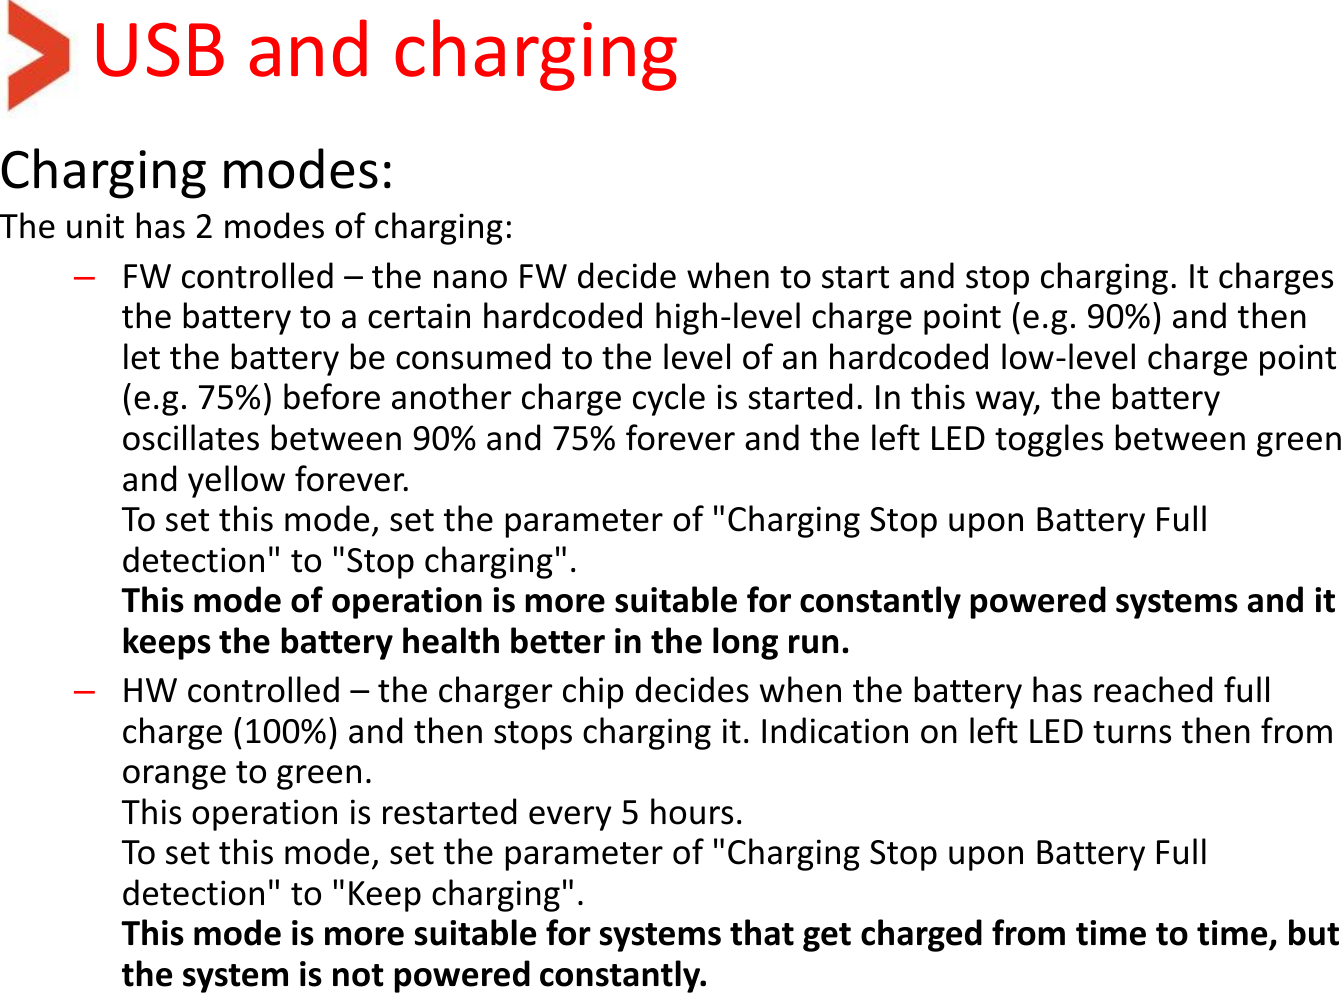 USB and charging Charging modes: The unit has 2 modes of charging:  –FW controlled – the nano FW decide when to start and stop charging. It charges the battery to a certain hardcoded high-level charge point (e.g. 90%) and then let the battery be consumed to the level of an hardcoded low-level charge point (e.g. 75%) before another charge cycle is started. In this way, the battery oscillates between 90% and 75% forever and the left LED toggles between green and yellow forever. To set this mode, set the parameter of &quot;Charging Stop upon Battery Full detection&quot; to &quot;Stop charging&quot;. This mode of operation is more suitable for constantly powered systems and it keeps the battery health better in the long run.   –HW controlled – the charger chip decides when the battery has reached full charge (100%) and then stops charging it. Indication on left LED turns then from orange to green. This operation is restarted every 5 hours. To set this mode, set the parameter of &quot;Charging Stop upon Battery Full detection&quot; to &quot;Keep charging&quot;. This mode is more suitable for systems that get charged from time to time, but the system is not powered constantly.  